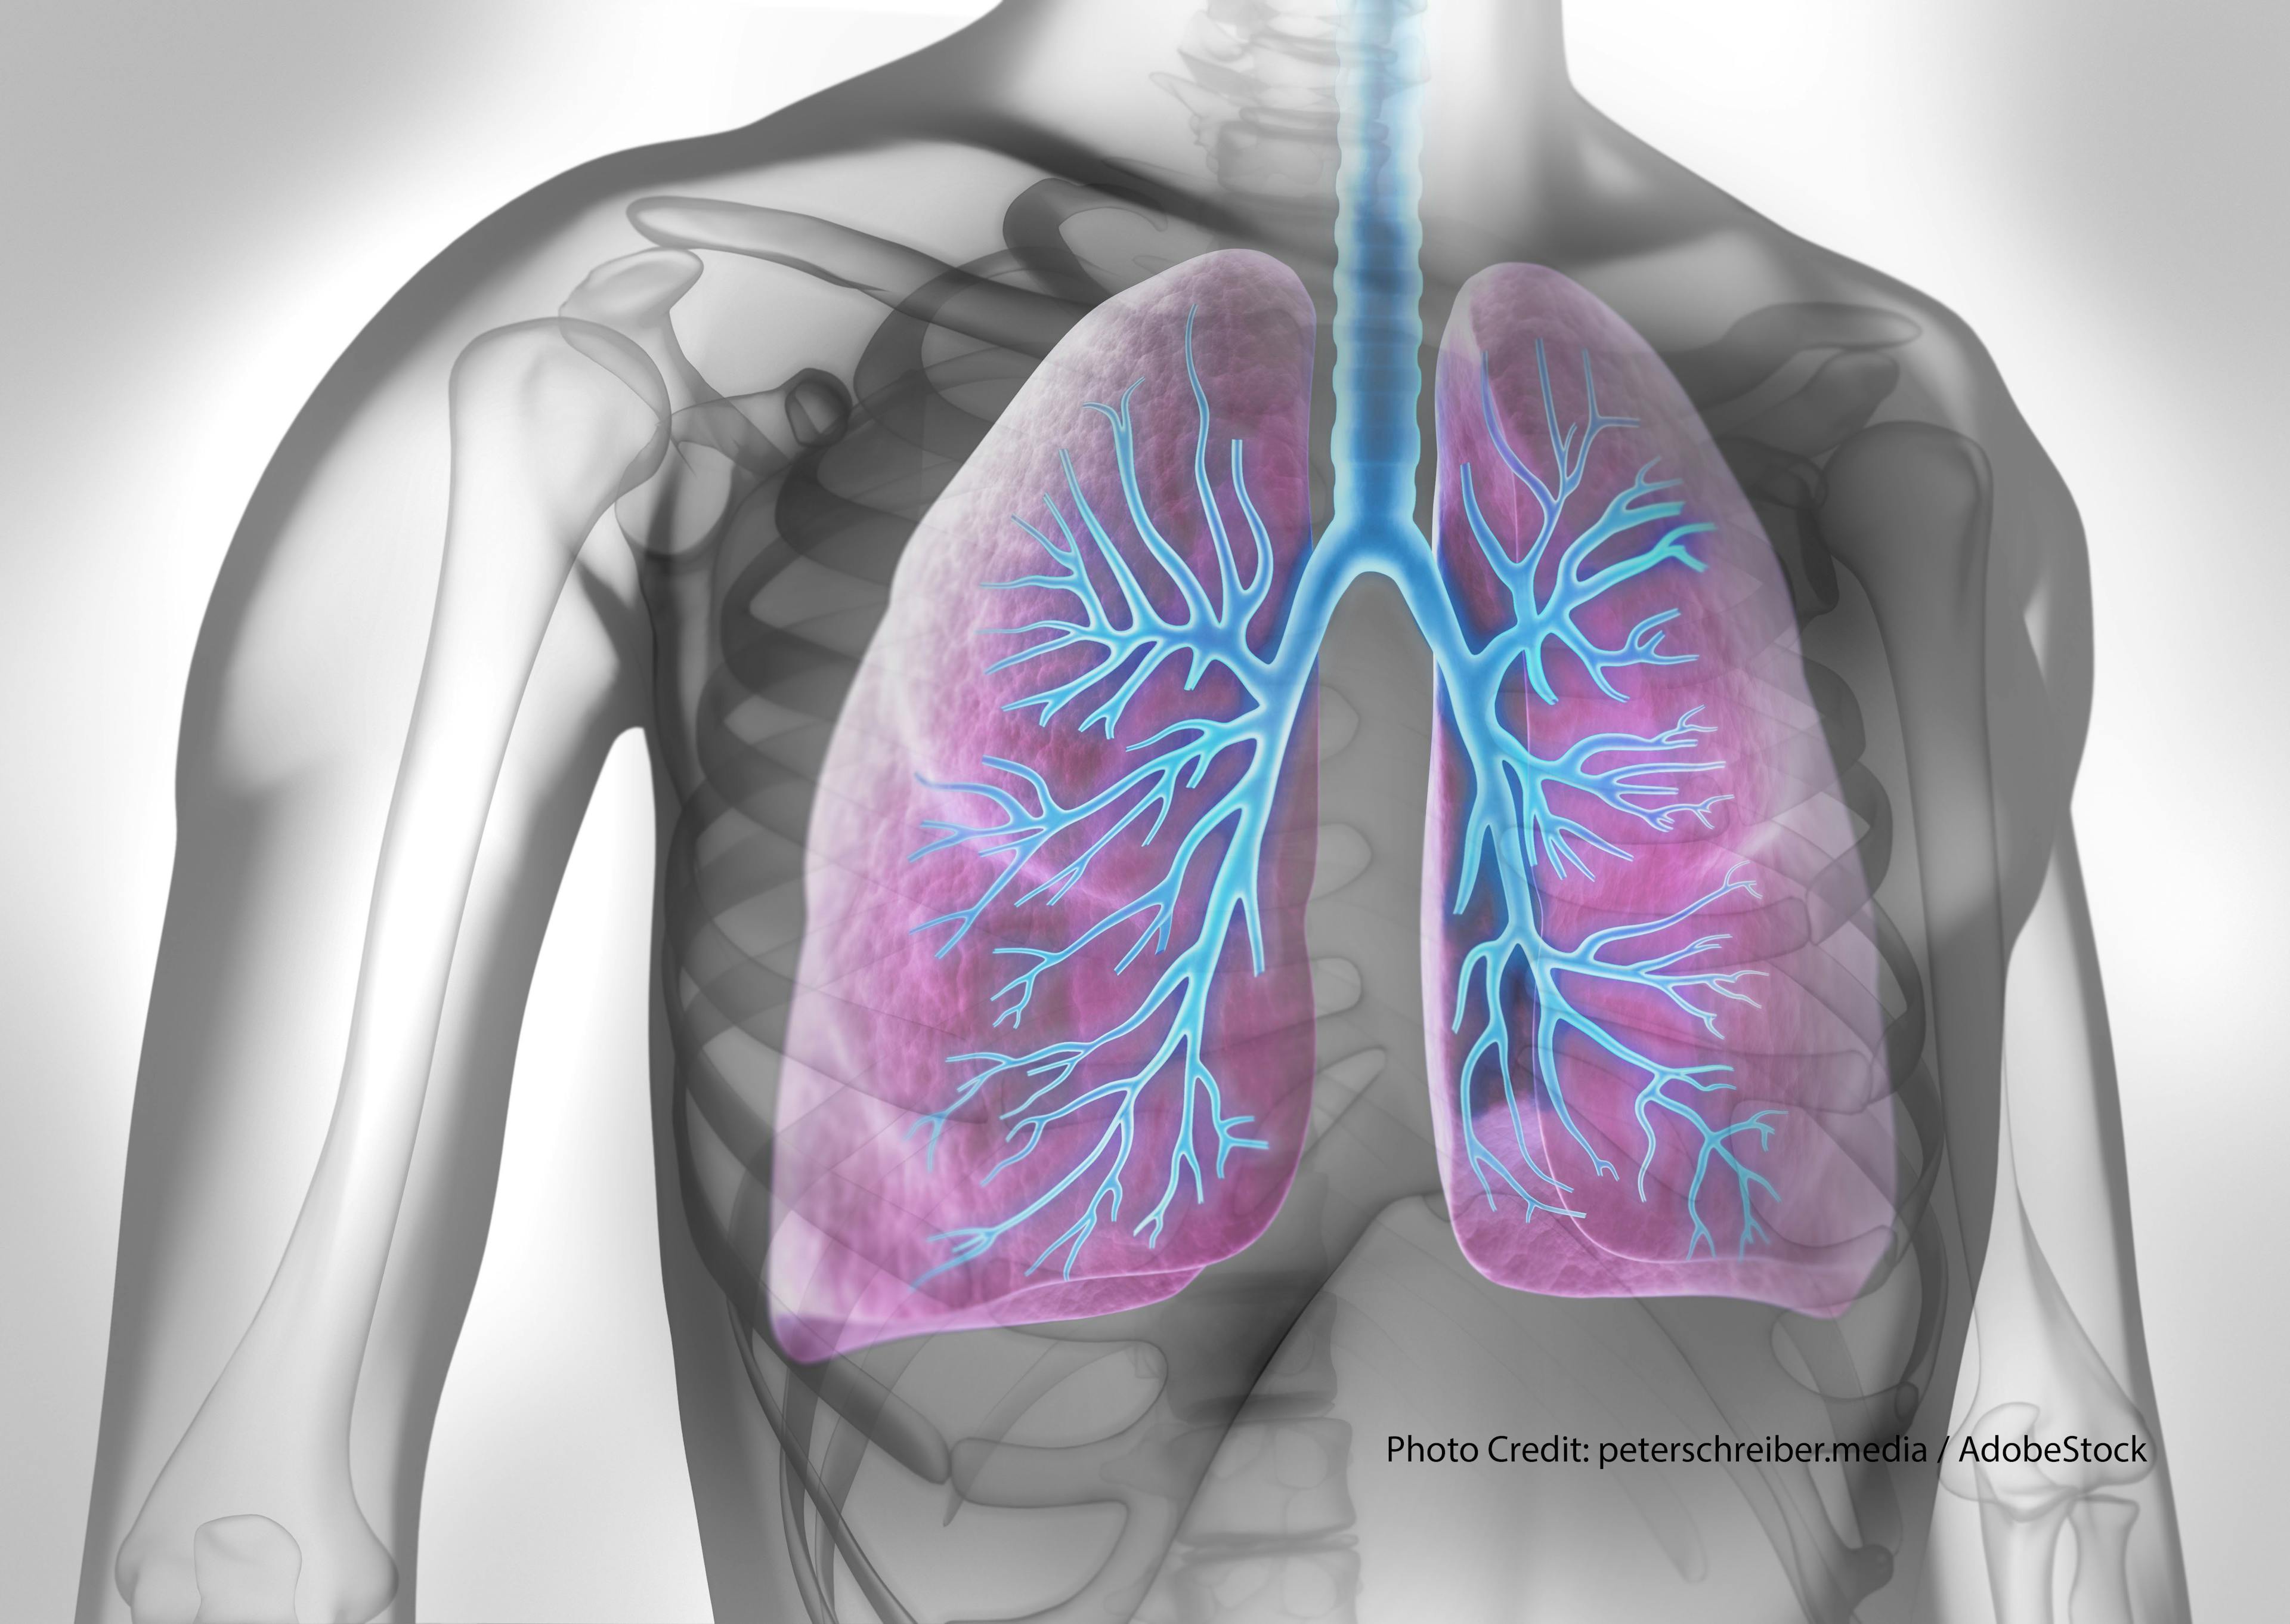 How to manage COPD patients